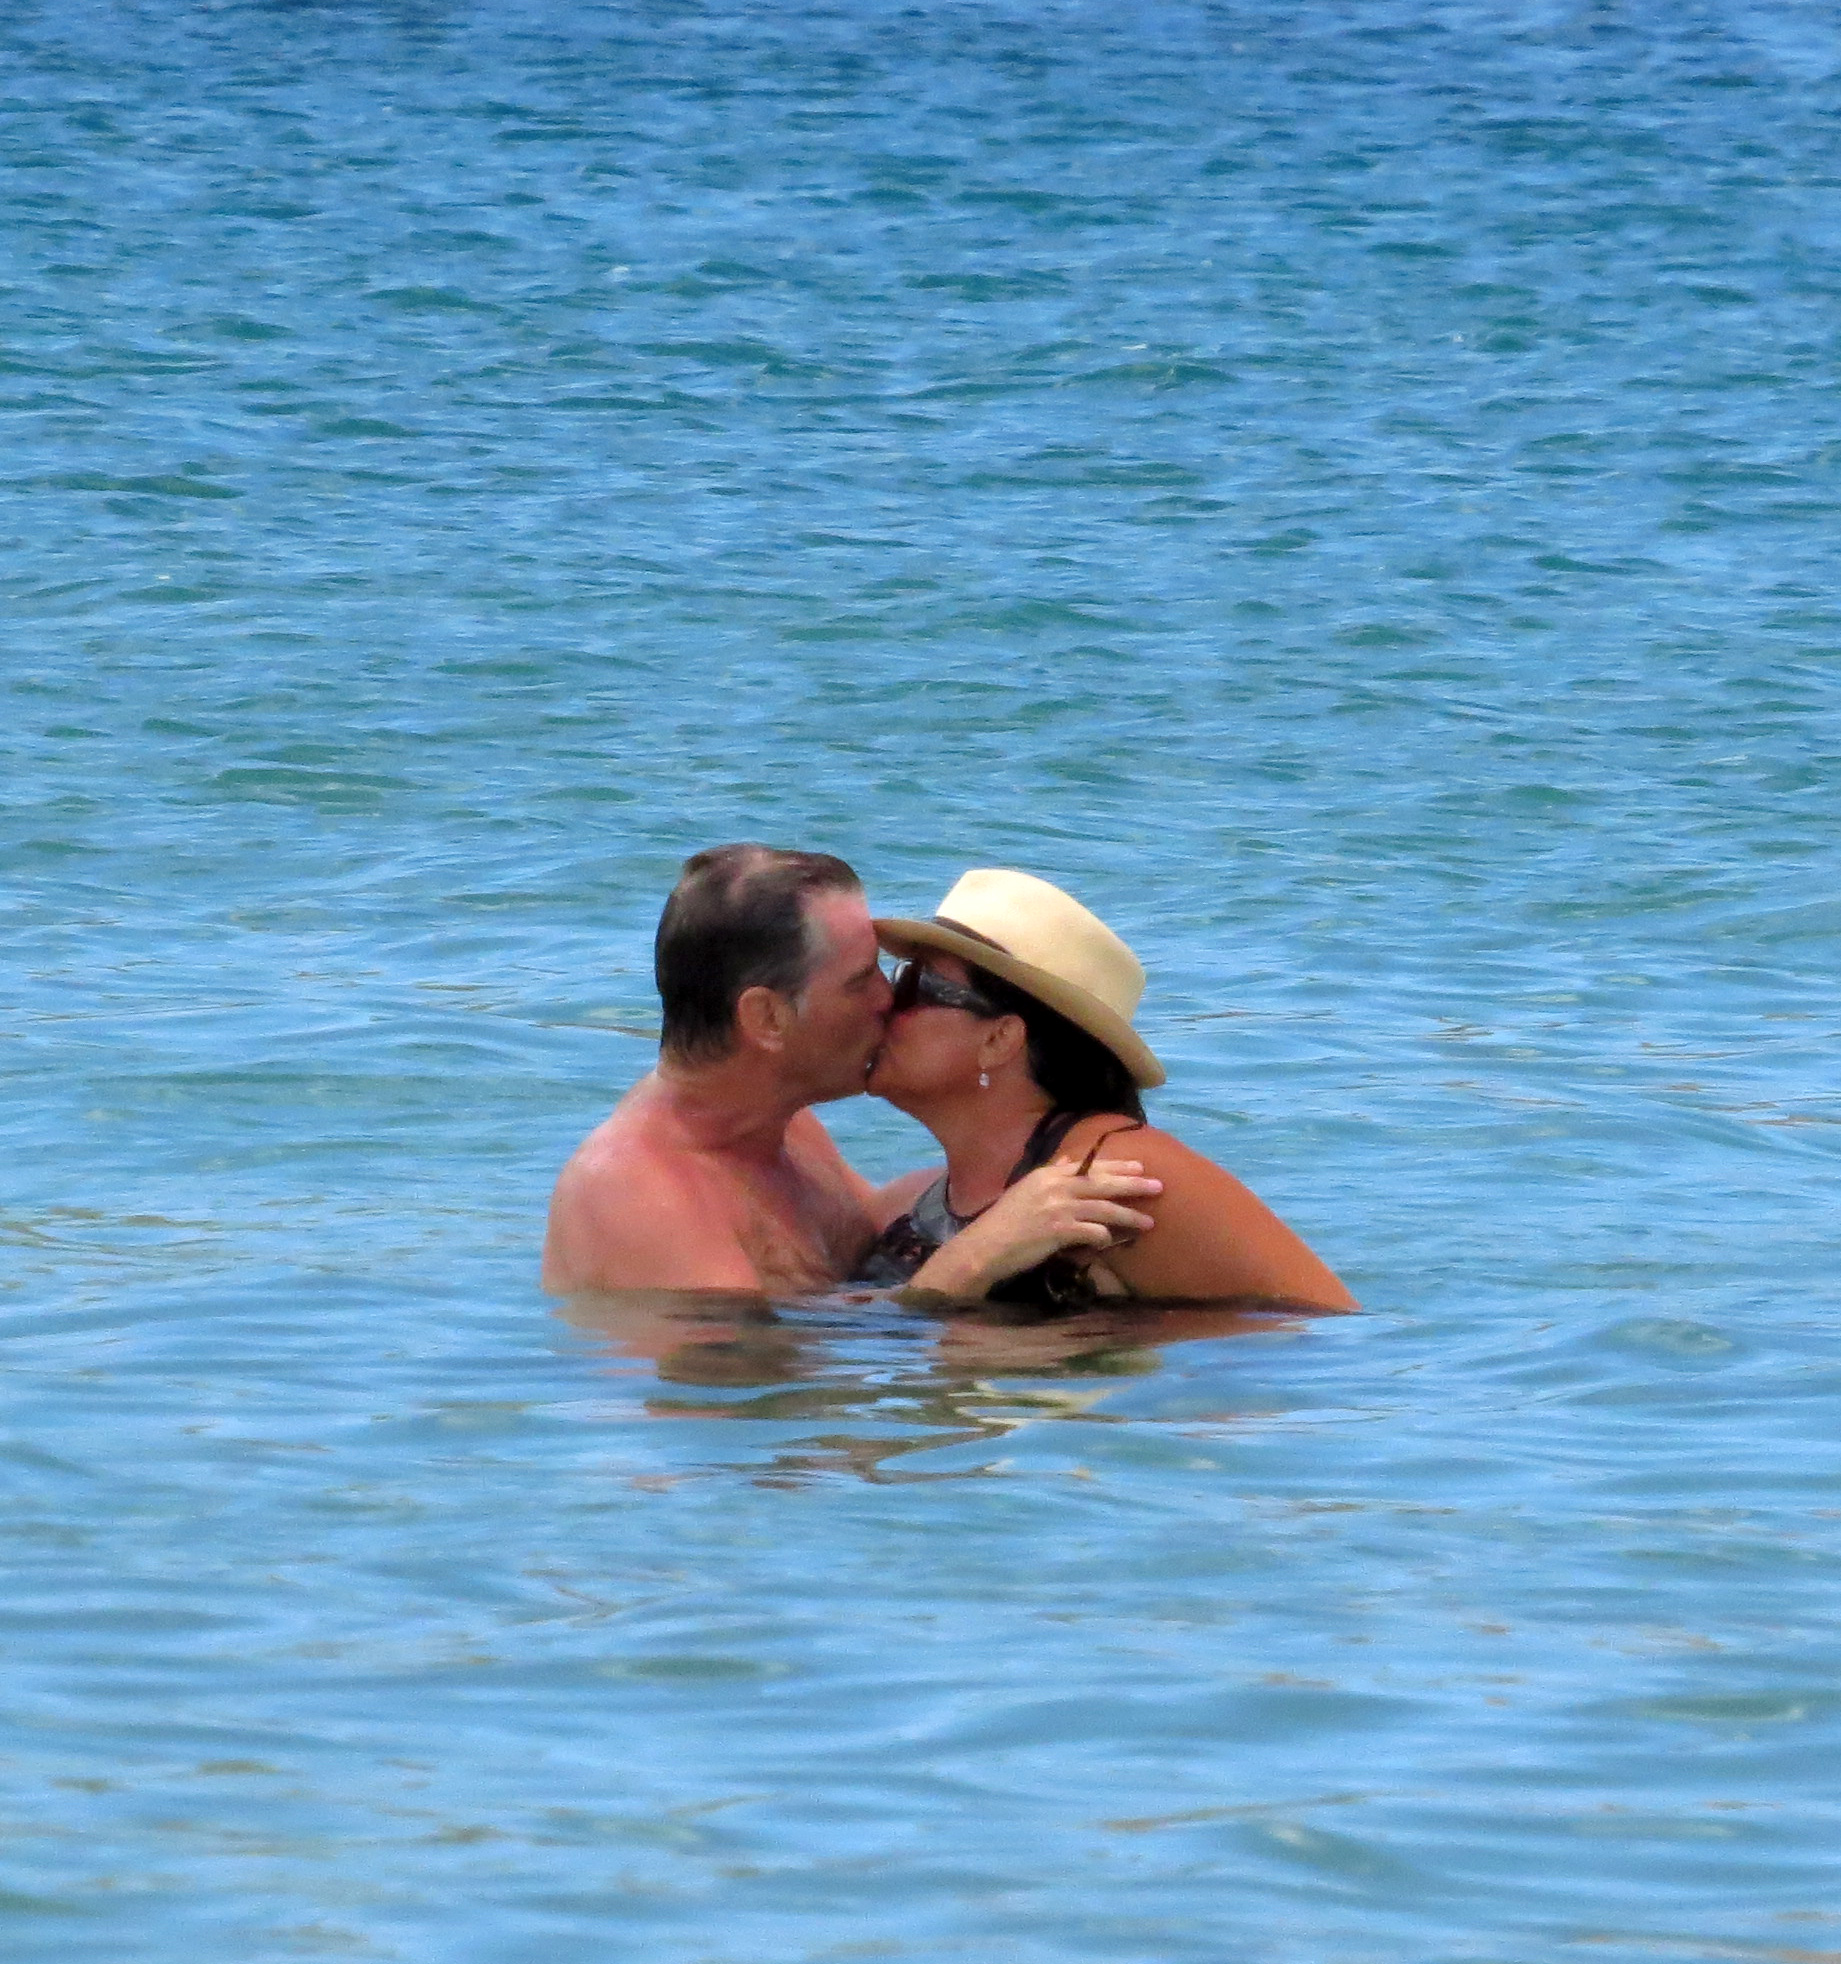 Pierce Brosnan and wife Keely Shaye Smith enjoy a kiss in the waters off Kauai